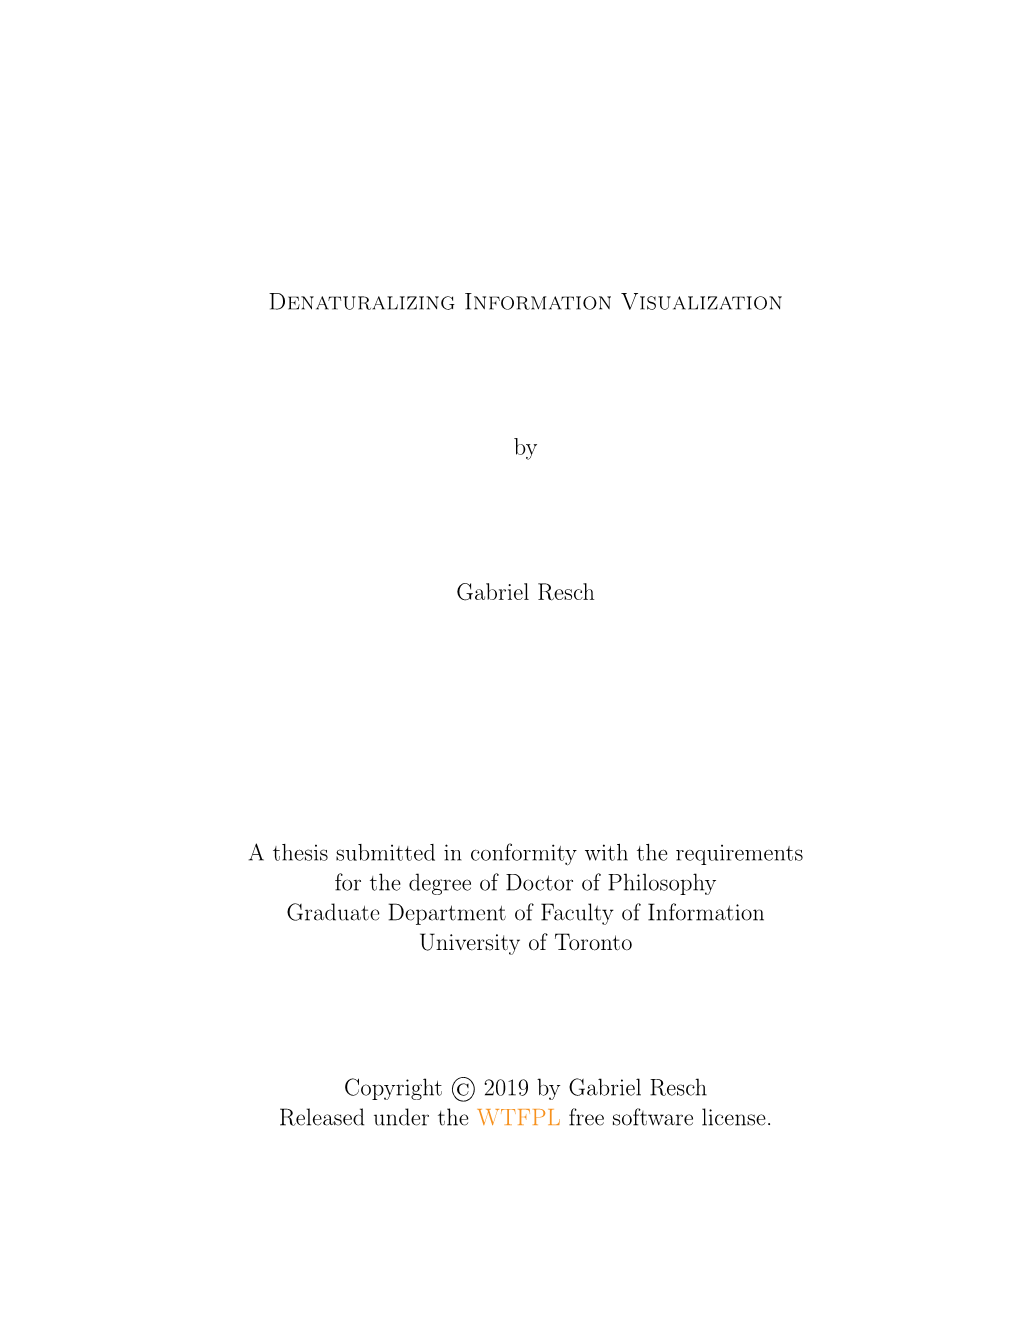 Denaturalizing Information Visualization by Gabriel Resch a Thesis Submitted in Conformity with the Requirements for the Degree